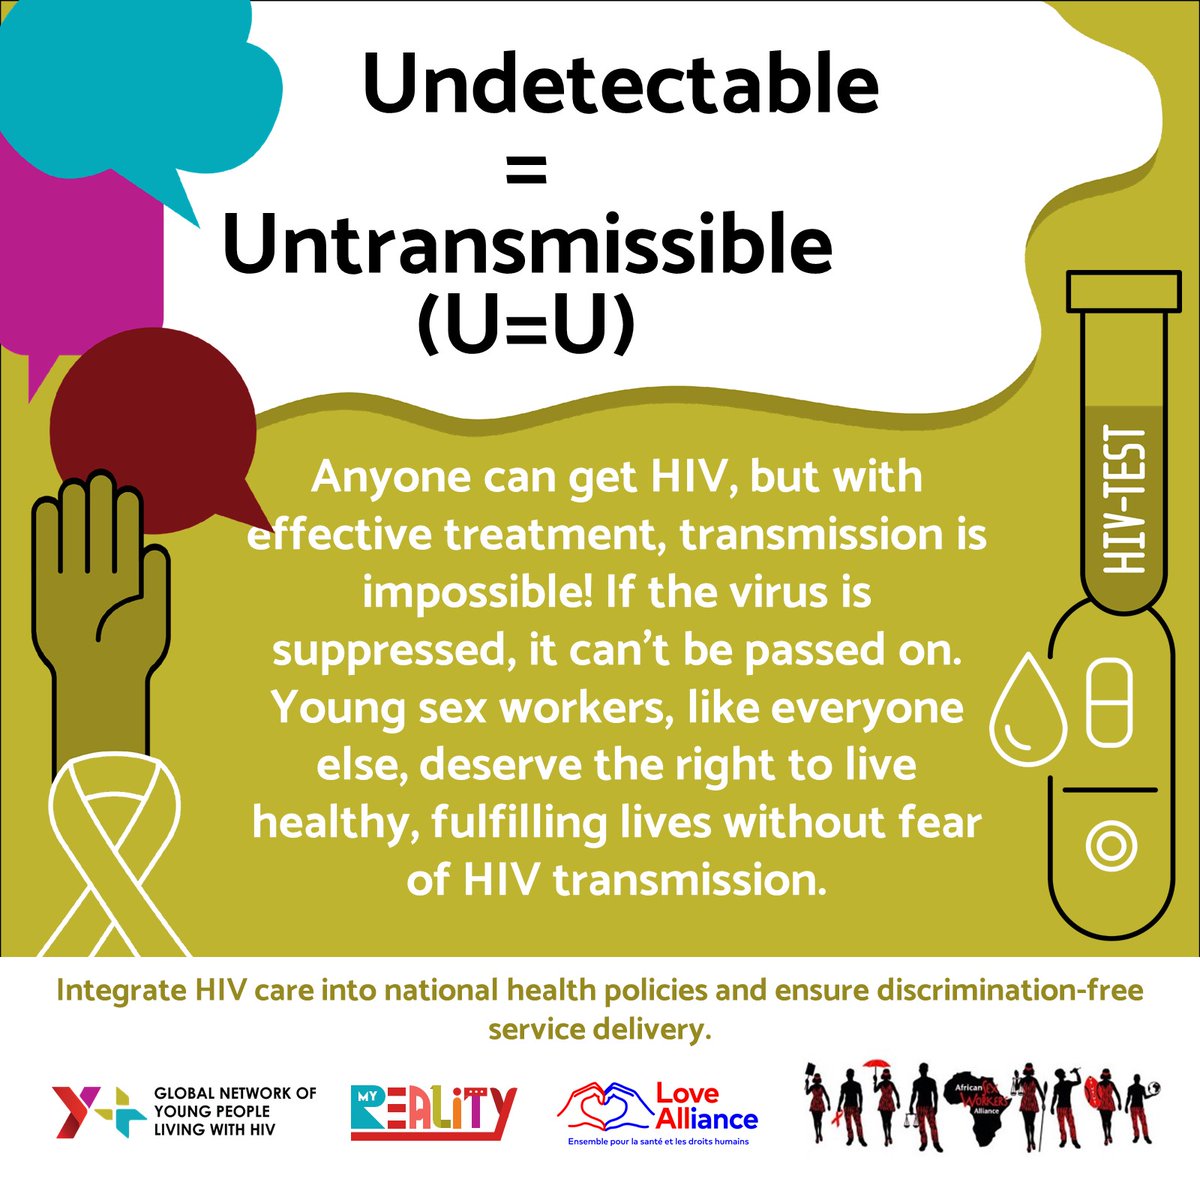 🔴🟡🟢 PSA for our community: Young sex workers deserve access to HIV treatment and care! 🚨FACT: Anyone can get HIV, but with effective treatment, transmission is impossible! That's right! If the virus is suppressed, it can't be passed on. #UndetectableEqualsUntransmittable…